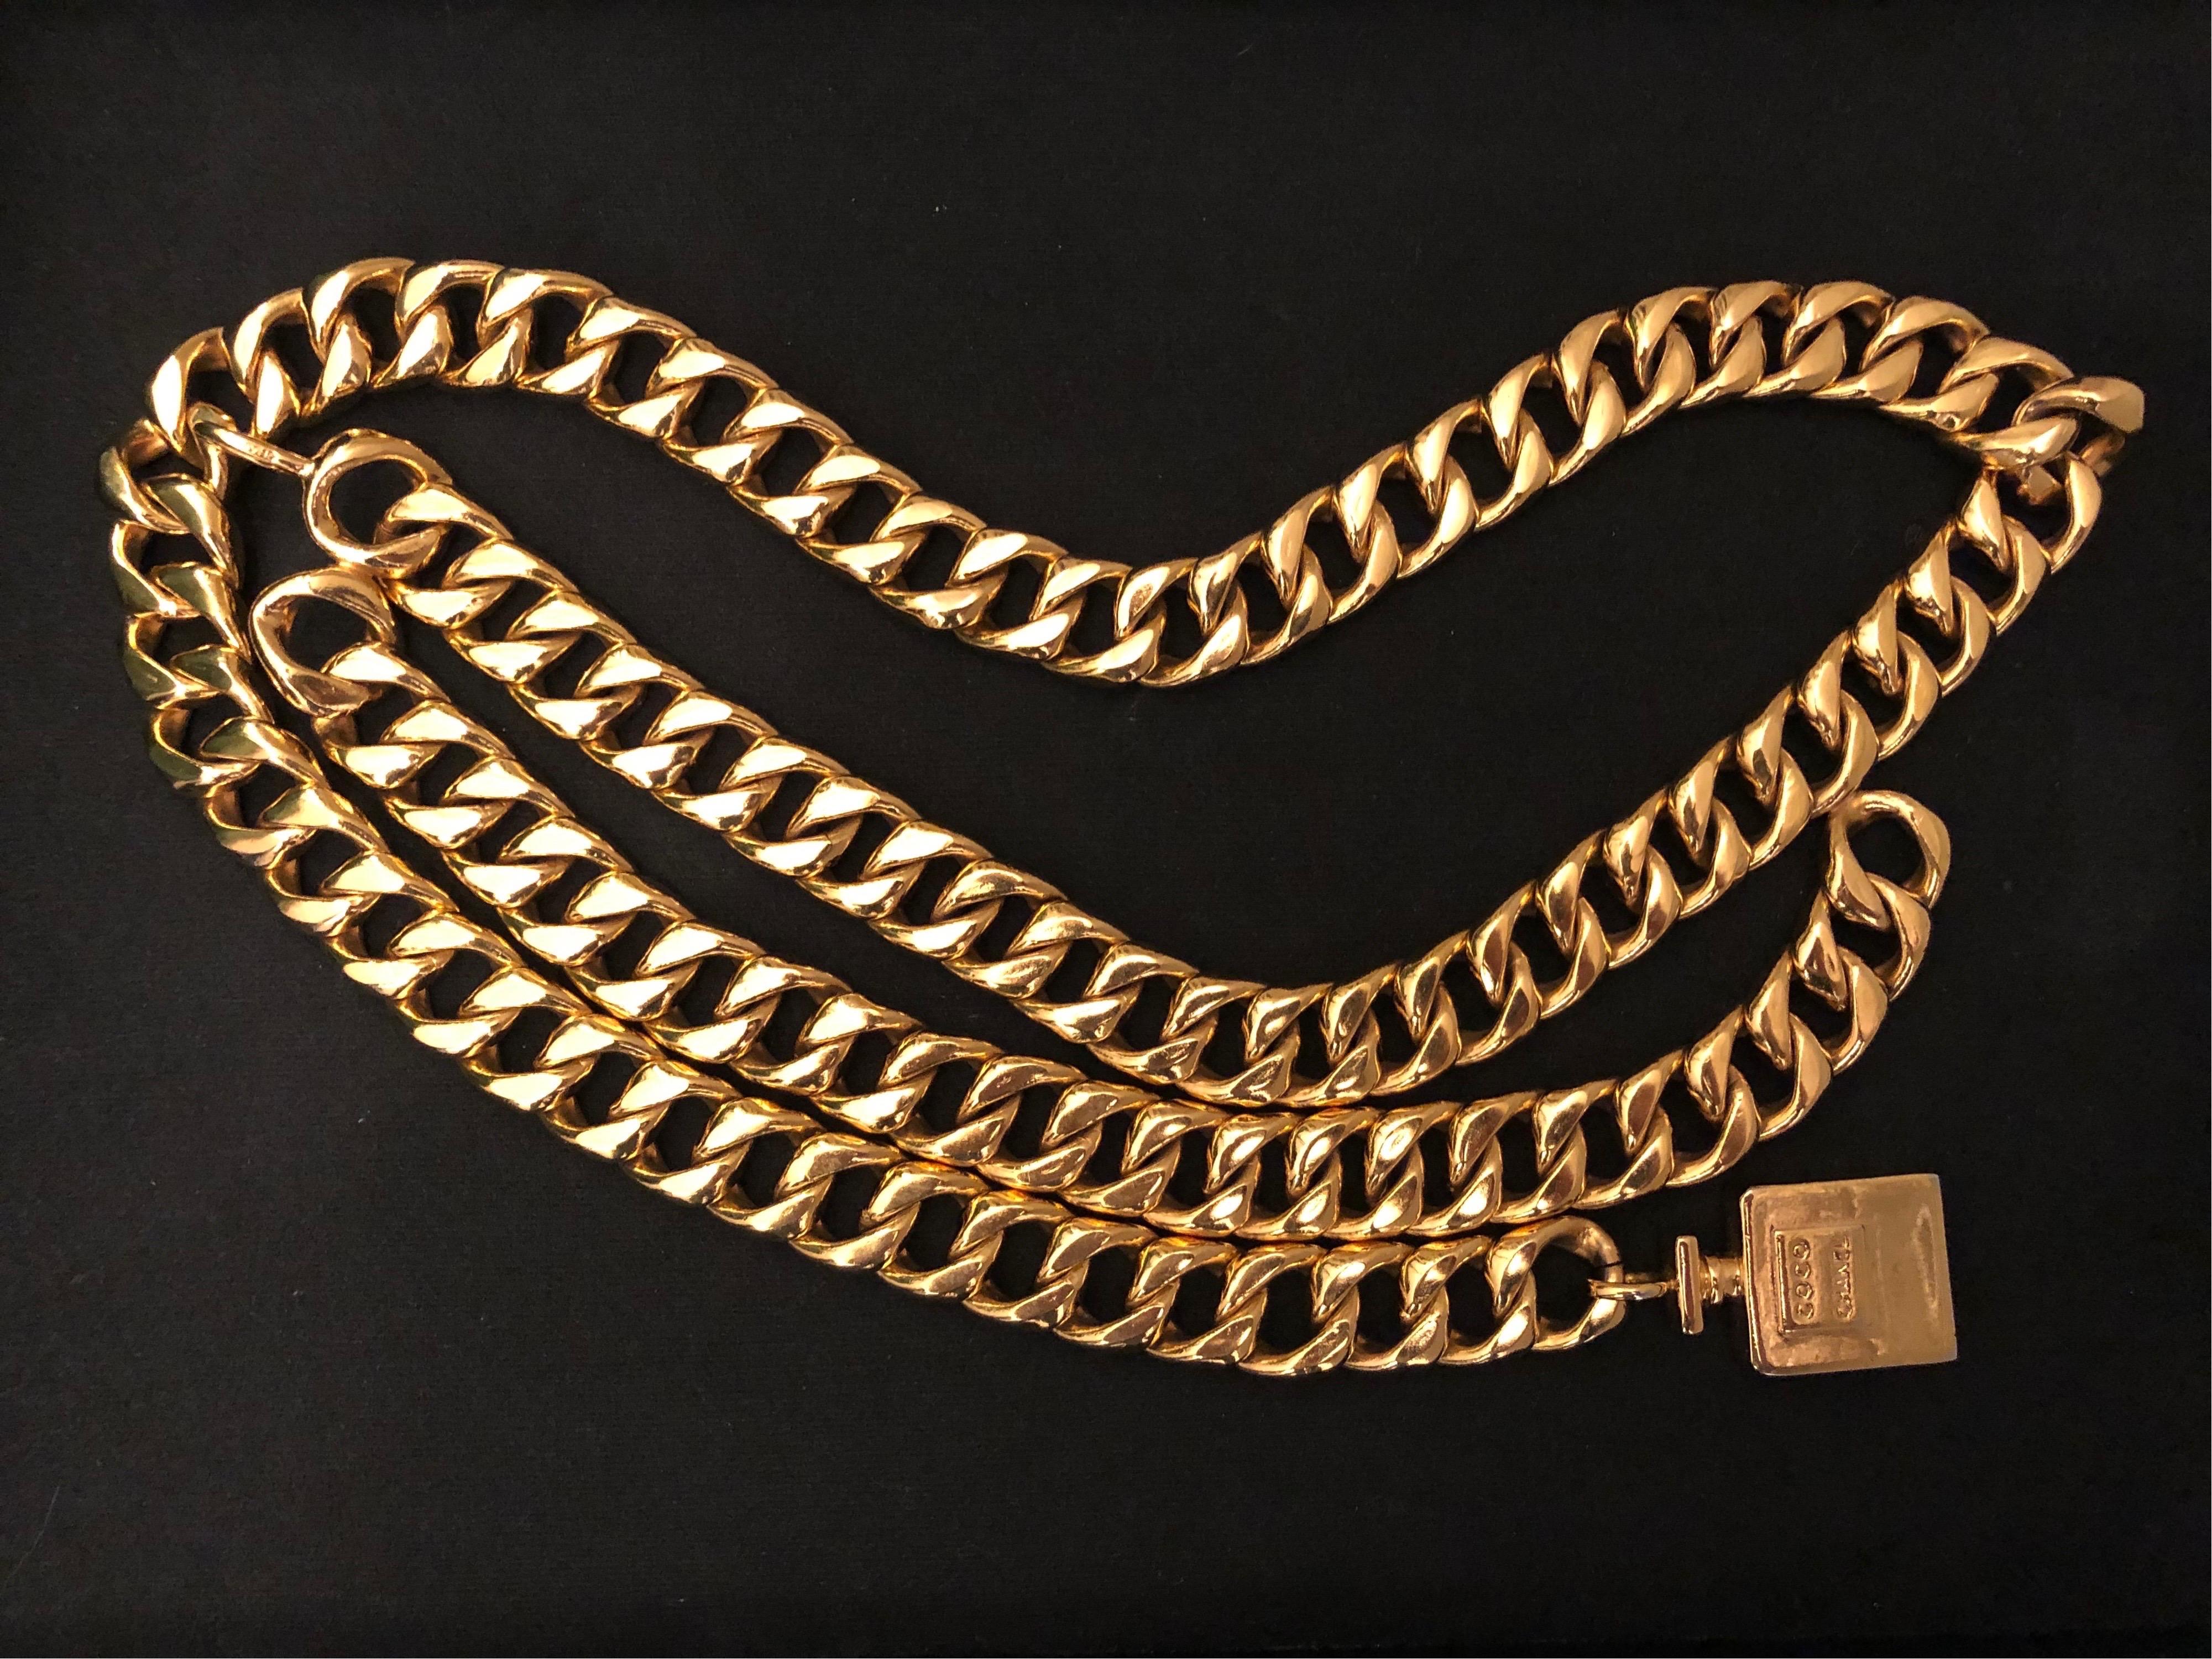 1980s Chanel gold toned chain belt featuring a gold toned Chanel COCO perfume bottle charm. It can be worn as a belt or a necklace. Stamped CHANEL. Adjustable hook fastening. 92 cm in length 1.8 cm in width. 

Condition - Minor signs of wear.